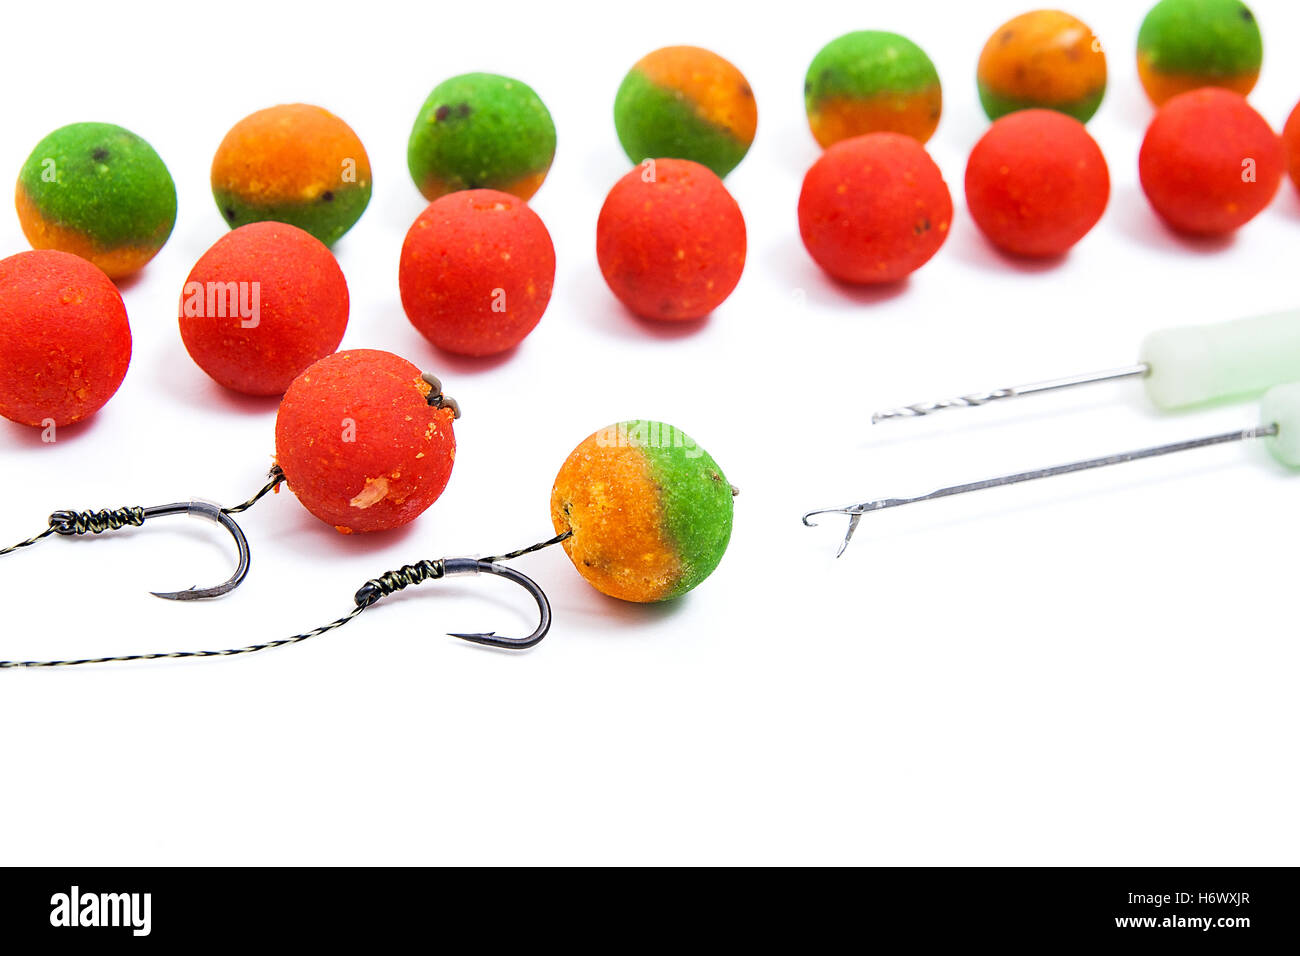 https://c8.alamy.com/comp/H6WXJR/close-up-view-of-fishing-baits-and-fishing-gear-for-carp-accessories-H6WXJR.jpg